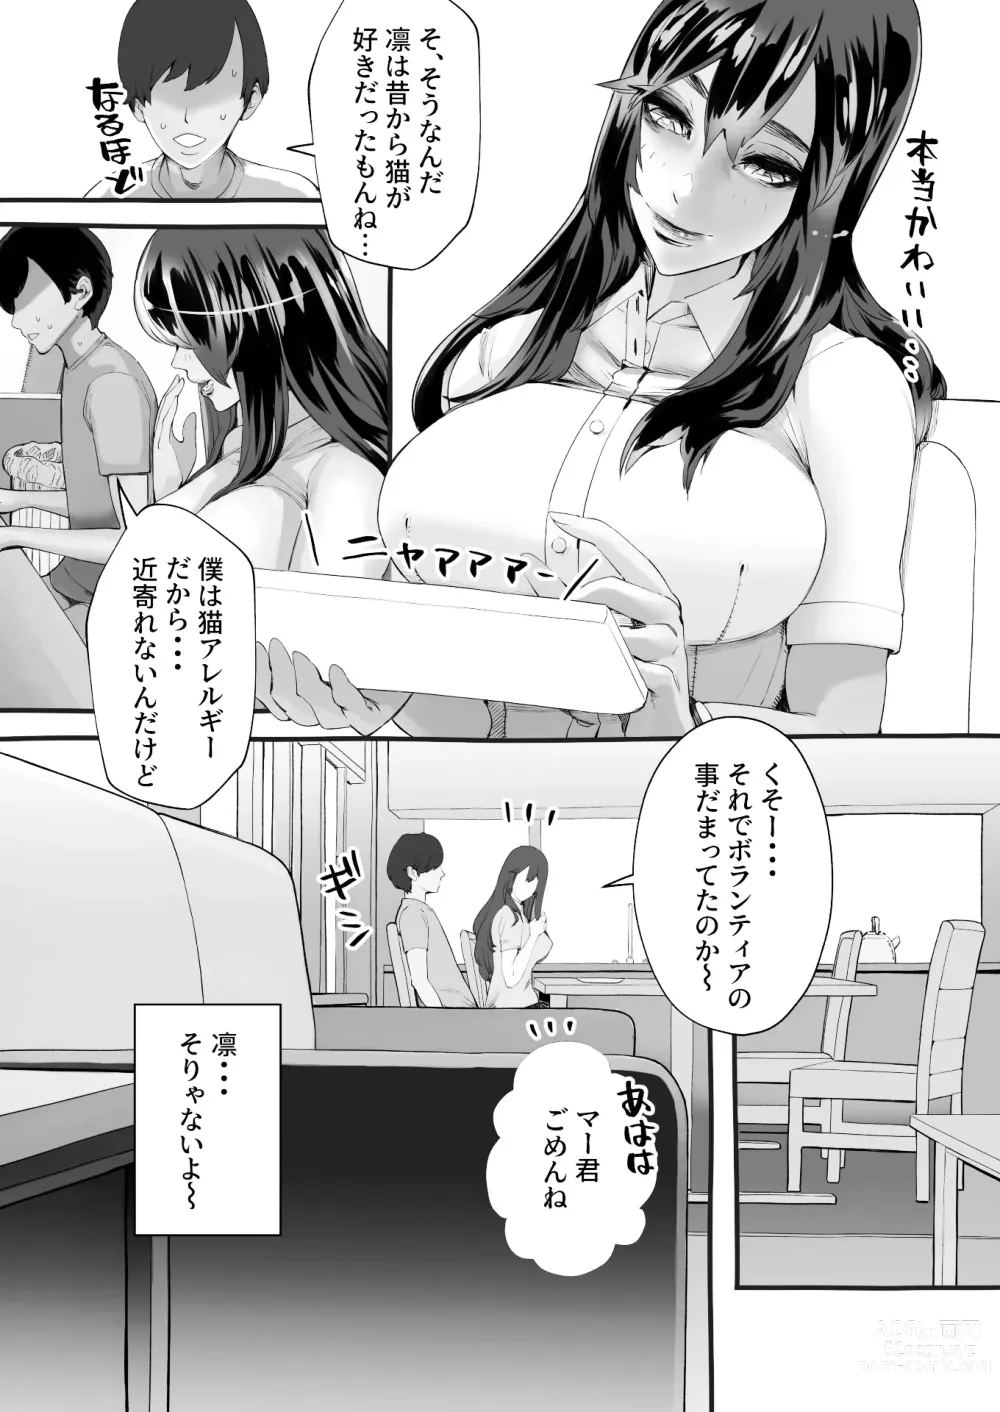 Page 14 of doujinshi 僕の彼女が他人棒で絶頂いたす